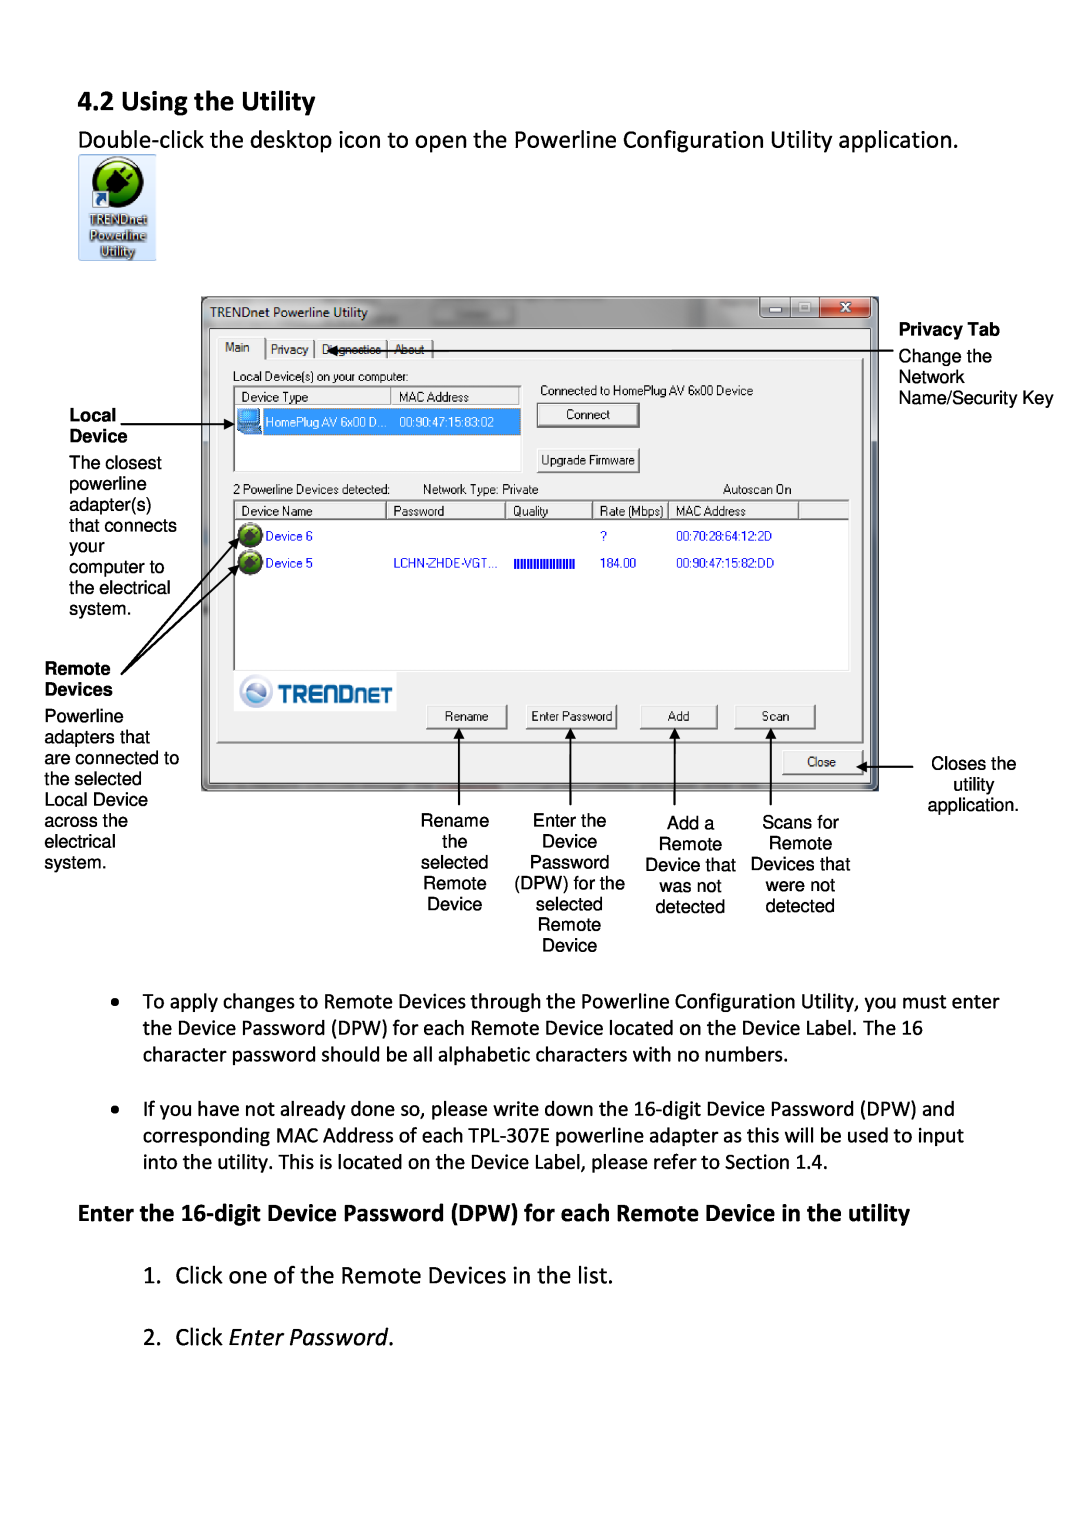 TRENDnet TPL307E2K manual Using the Utility, Click one of the Remote Devices in the list, Click Enter Password 